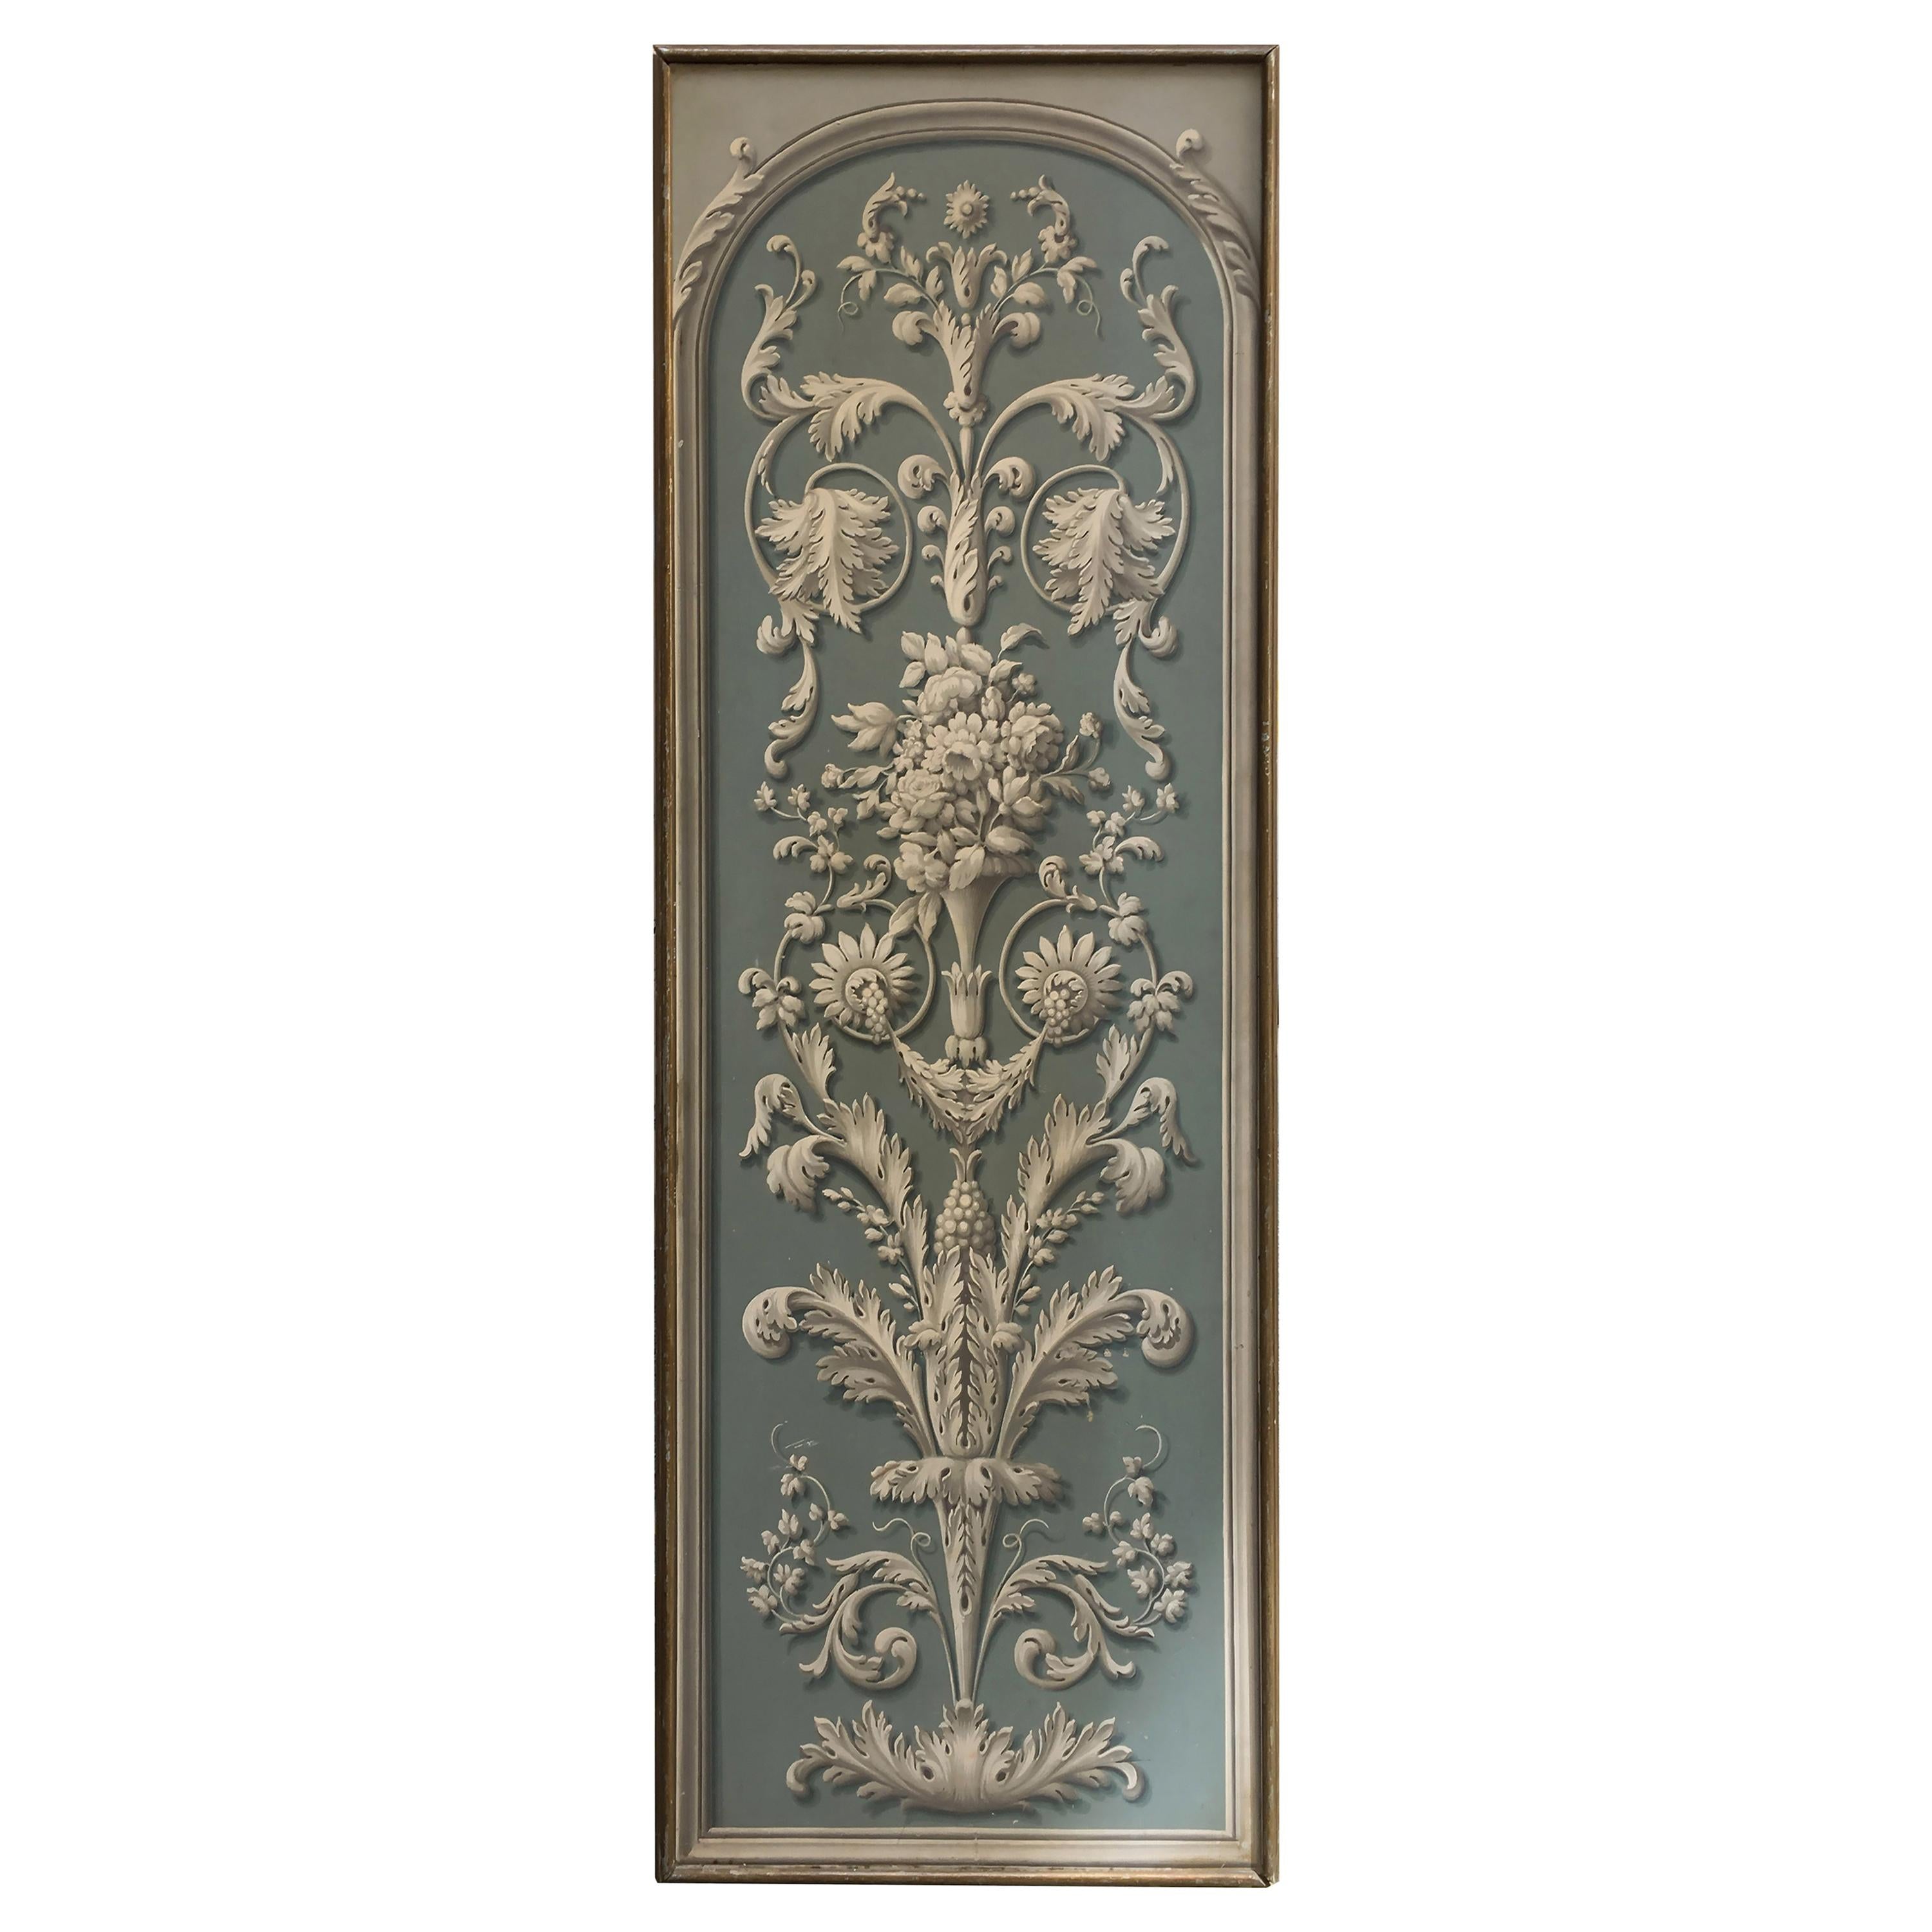 Hand Painted Decorative Panel from the 19th Century